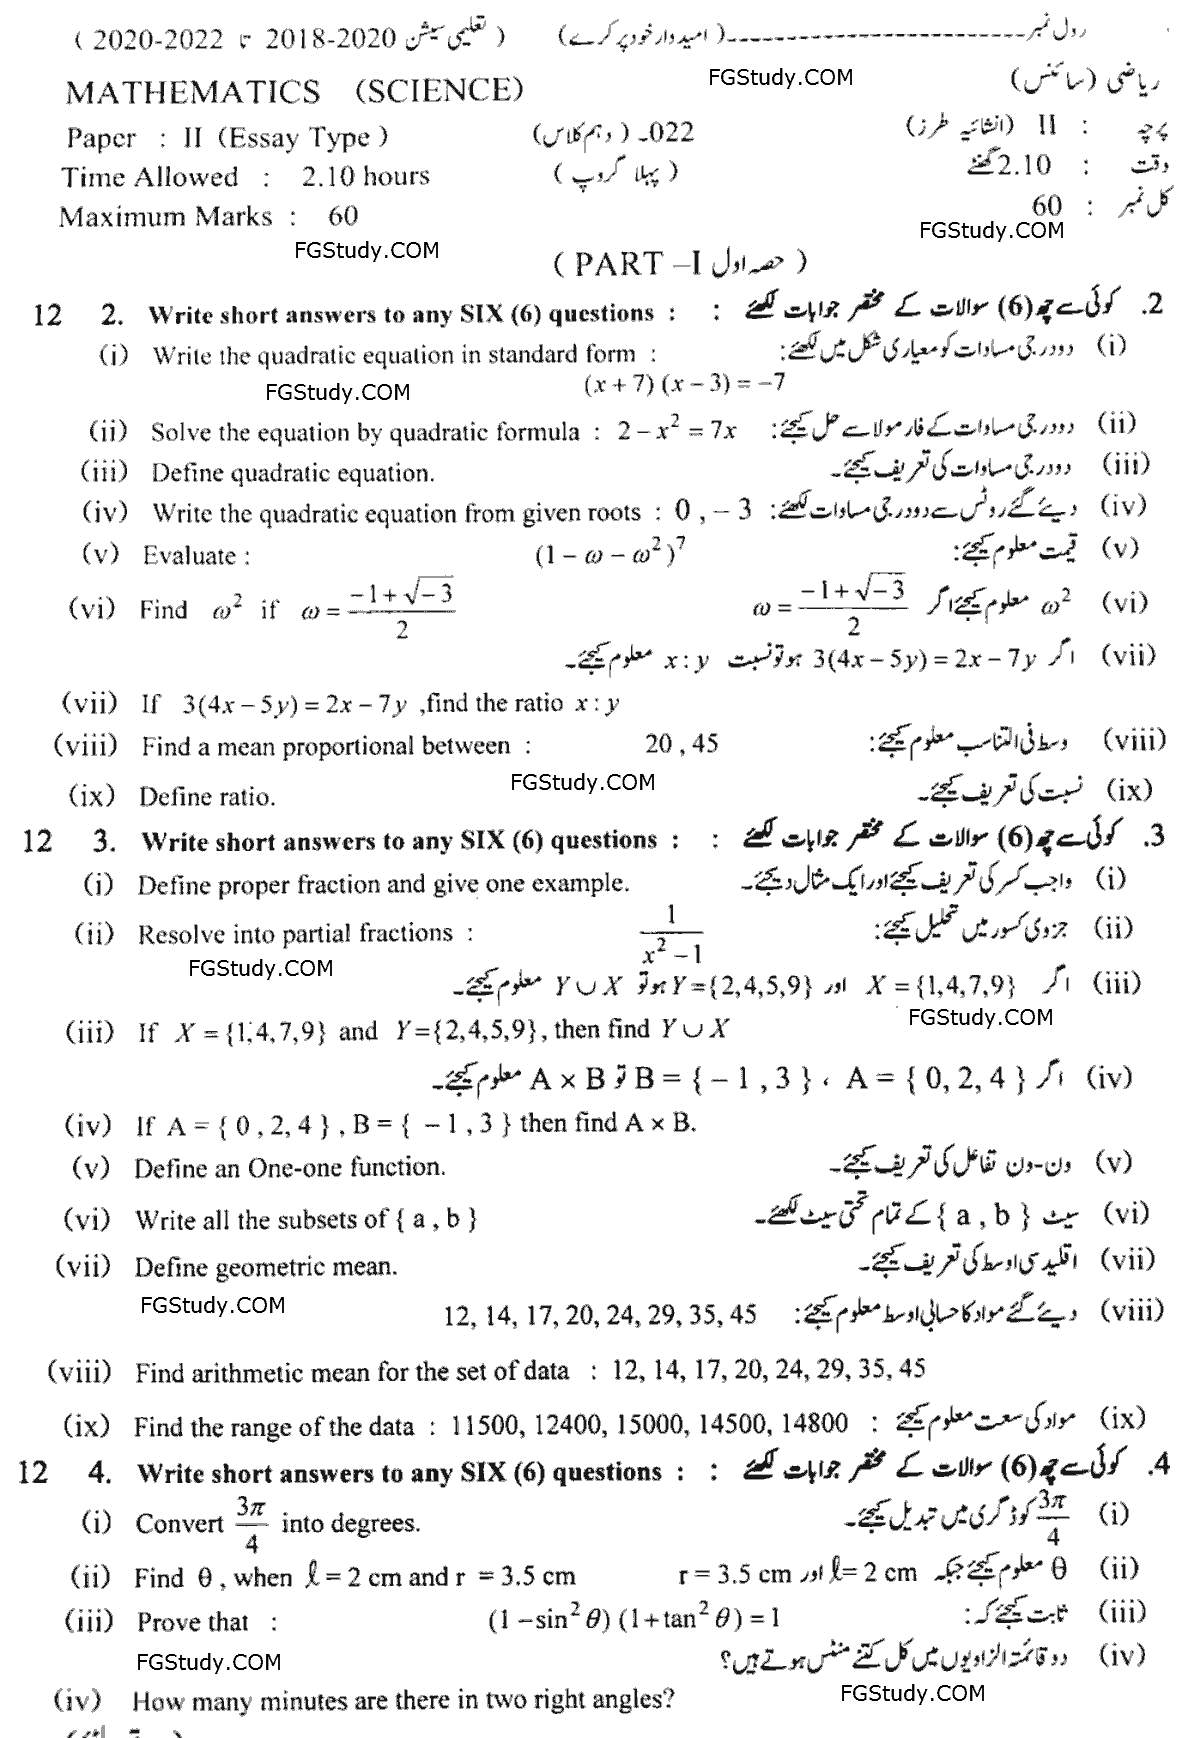 10th Mathematics Papers 2022 Lahore subjective Group 1